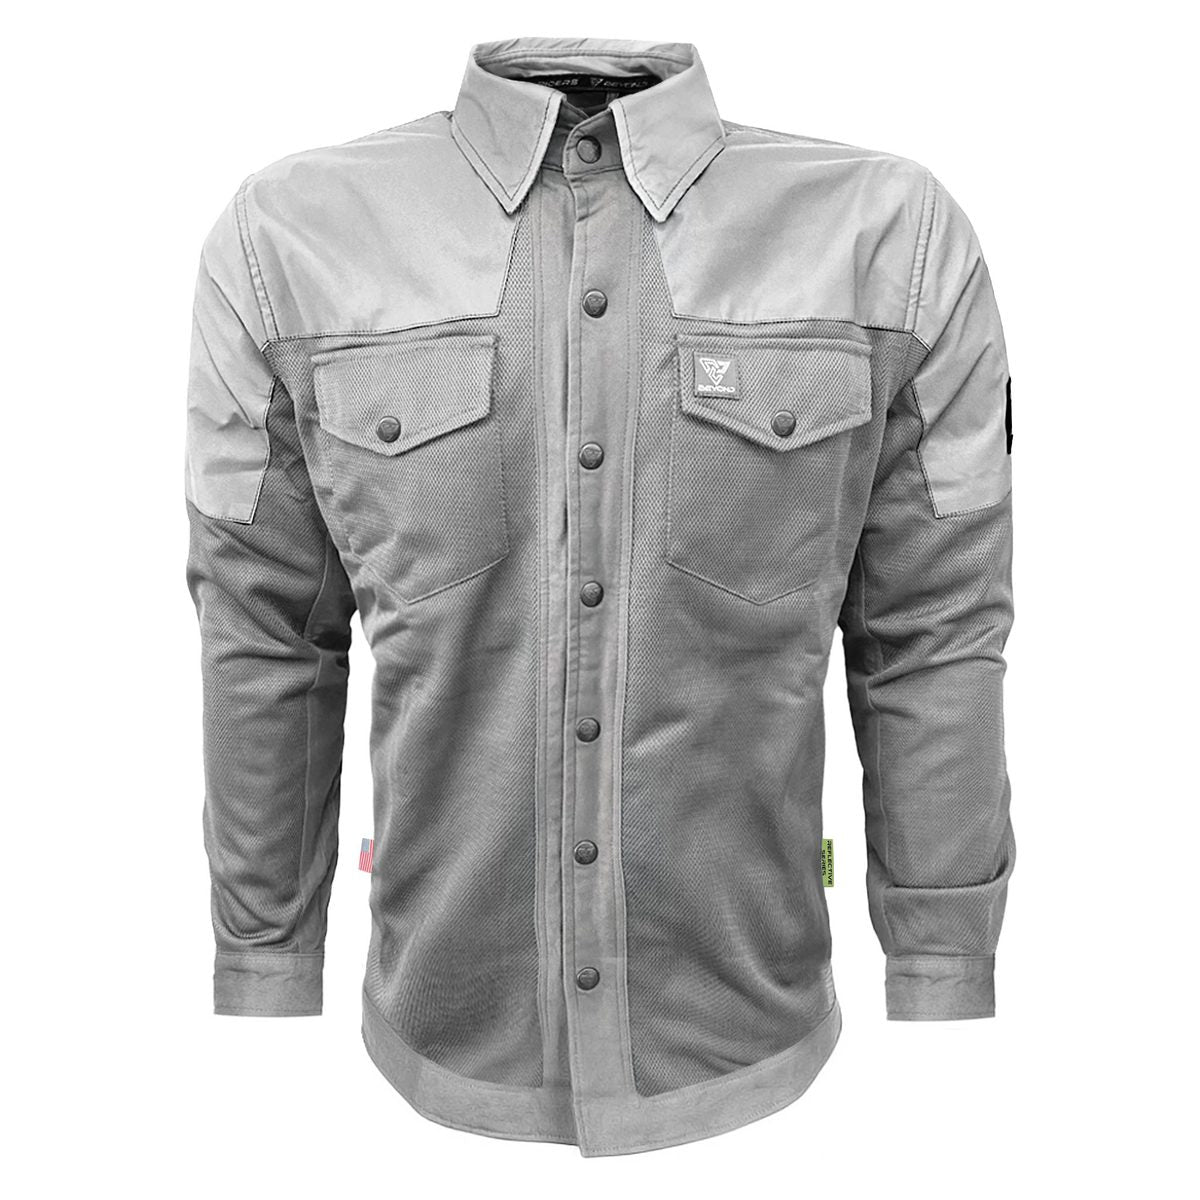 Reflective-Mesh-Shirt-For-Men-Gray-Solid-Front